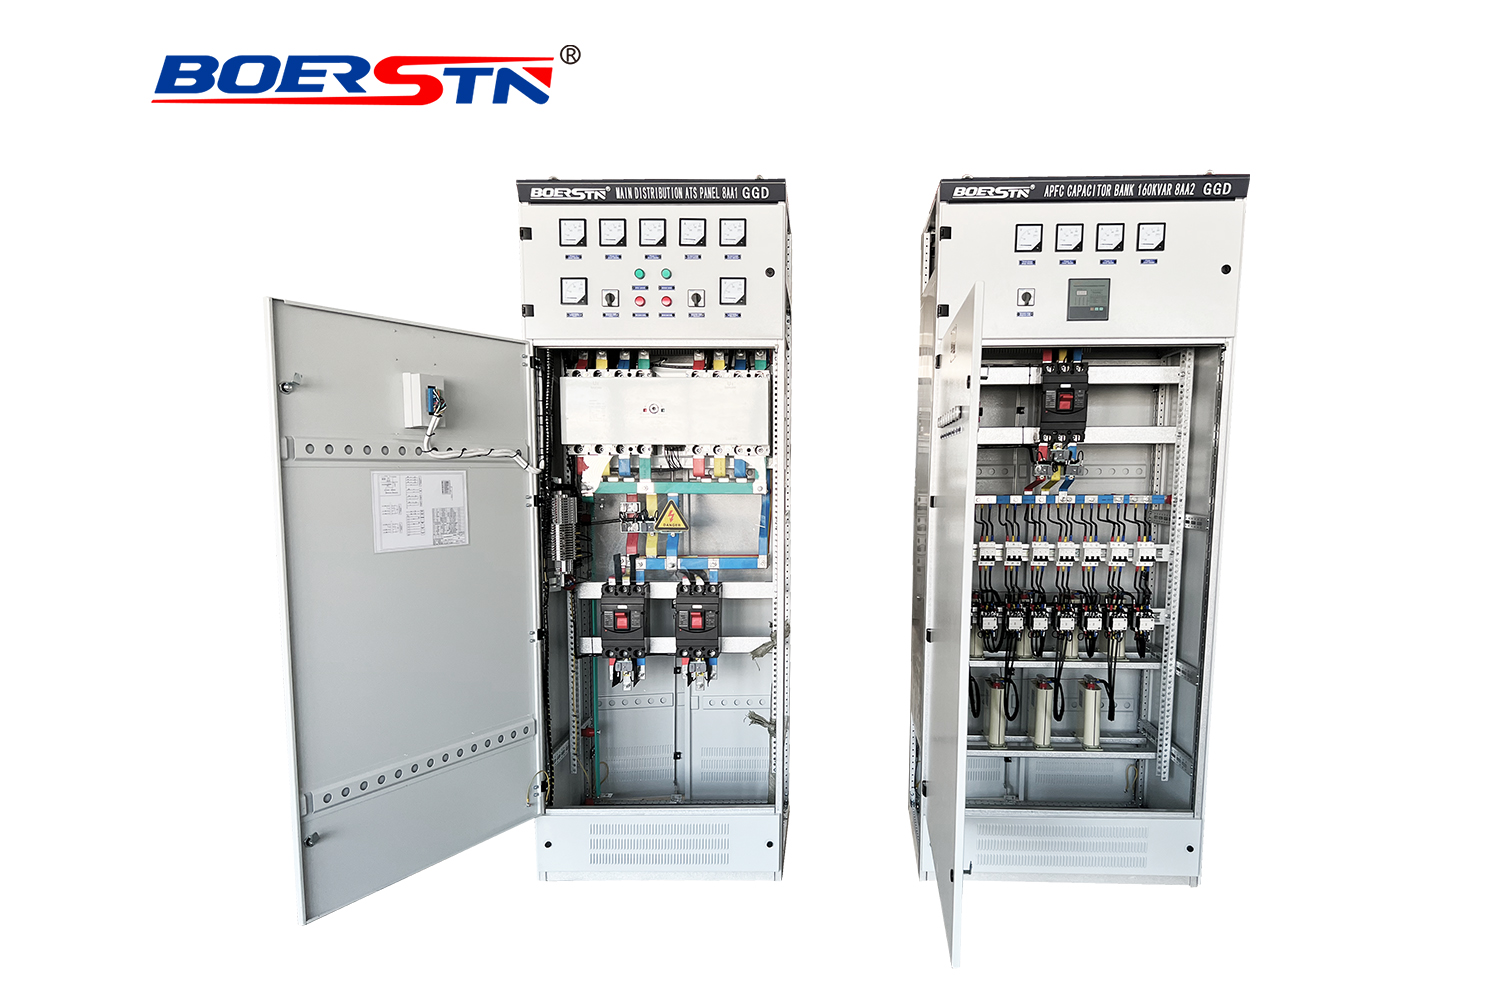 Low Voltage Fixed Switchgear GGD